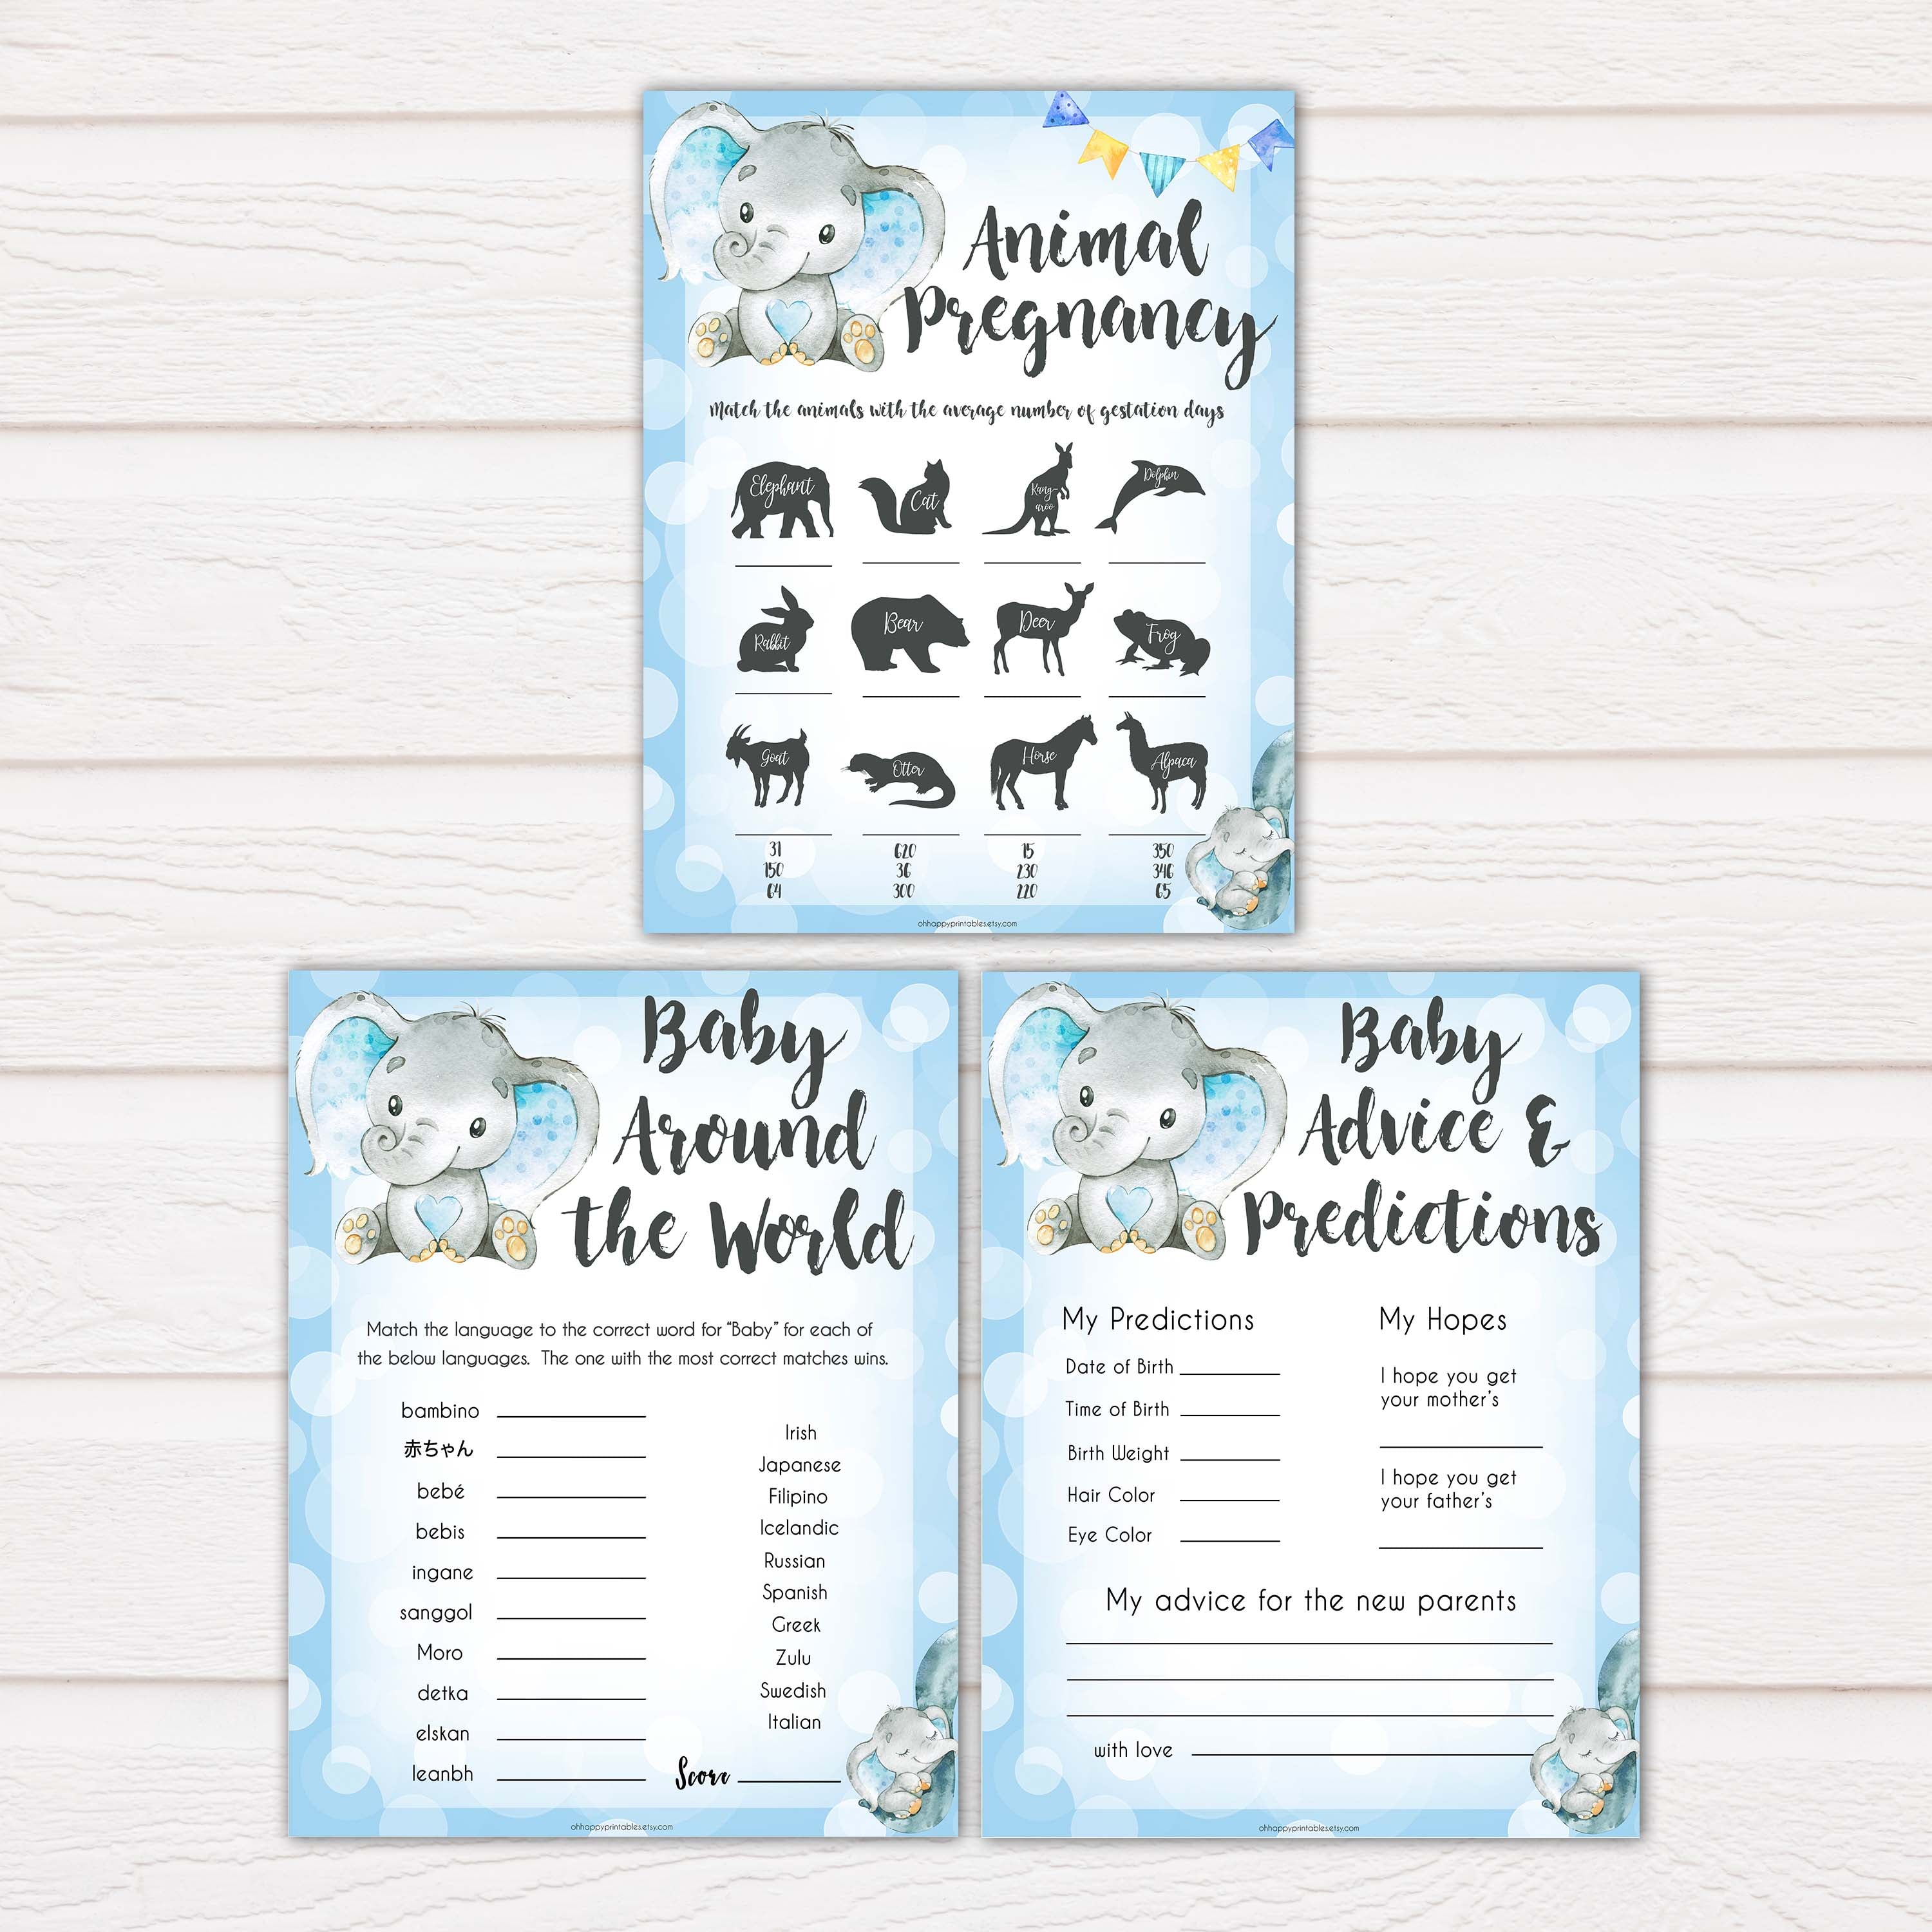 9 blue elephant baby shower games, baby shower games, baby games, baby shower ideas, its a boy baby games